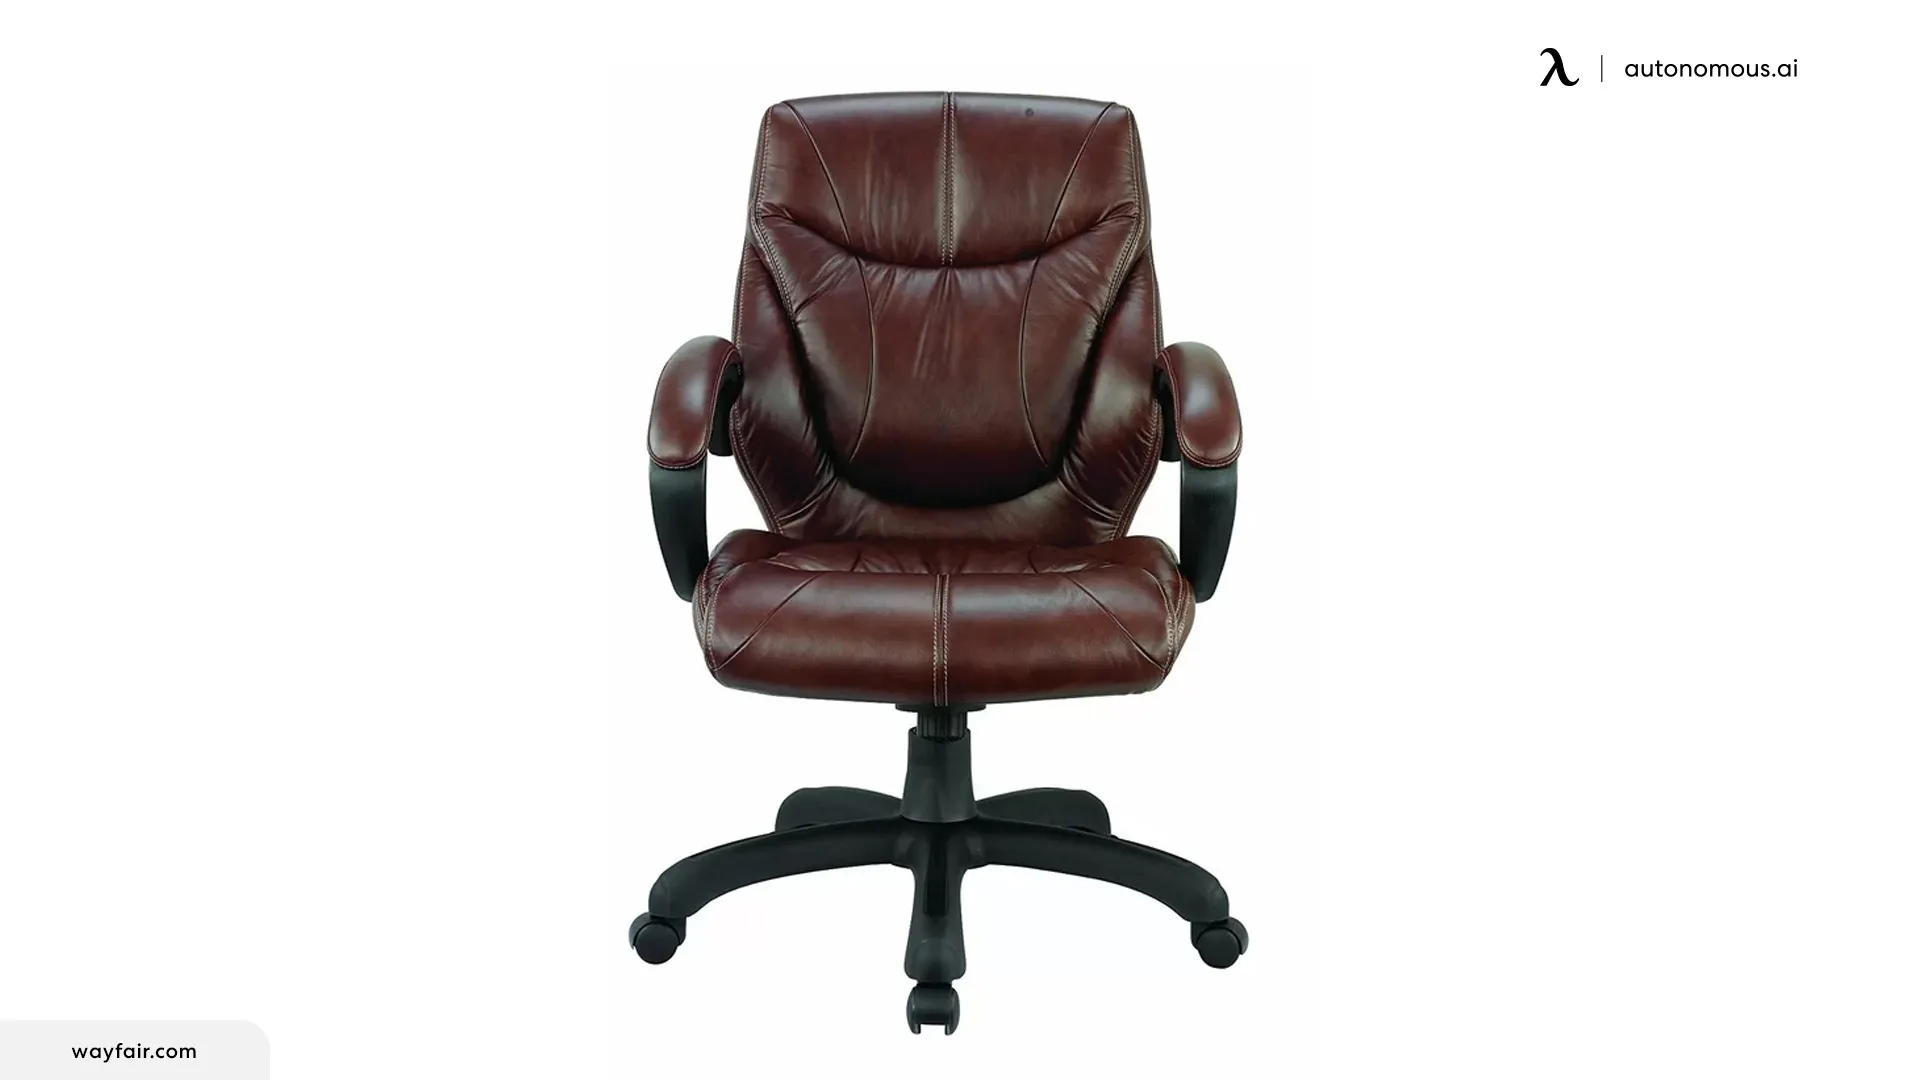 Tauber Genuine Leather Executive Chair